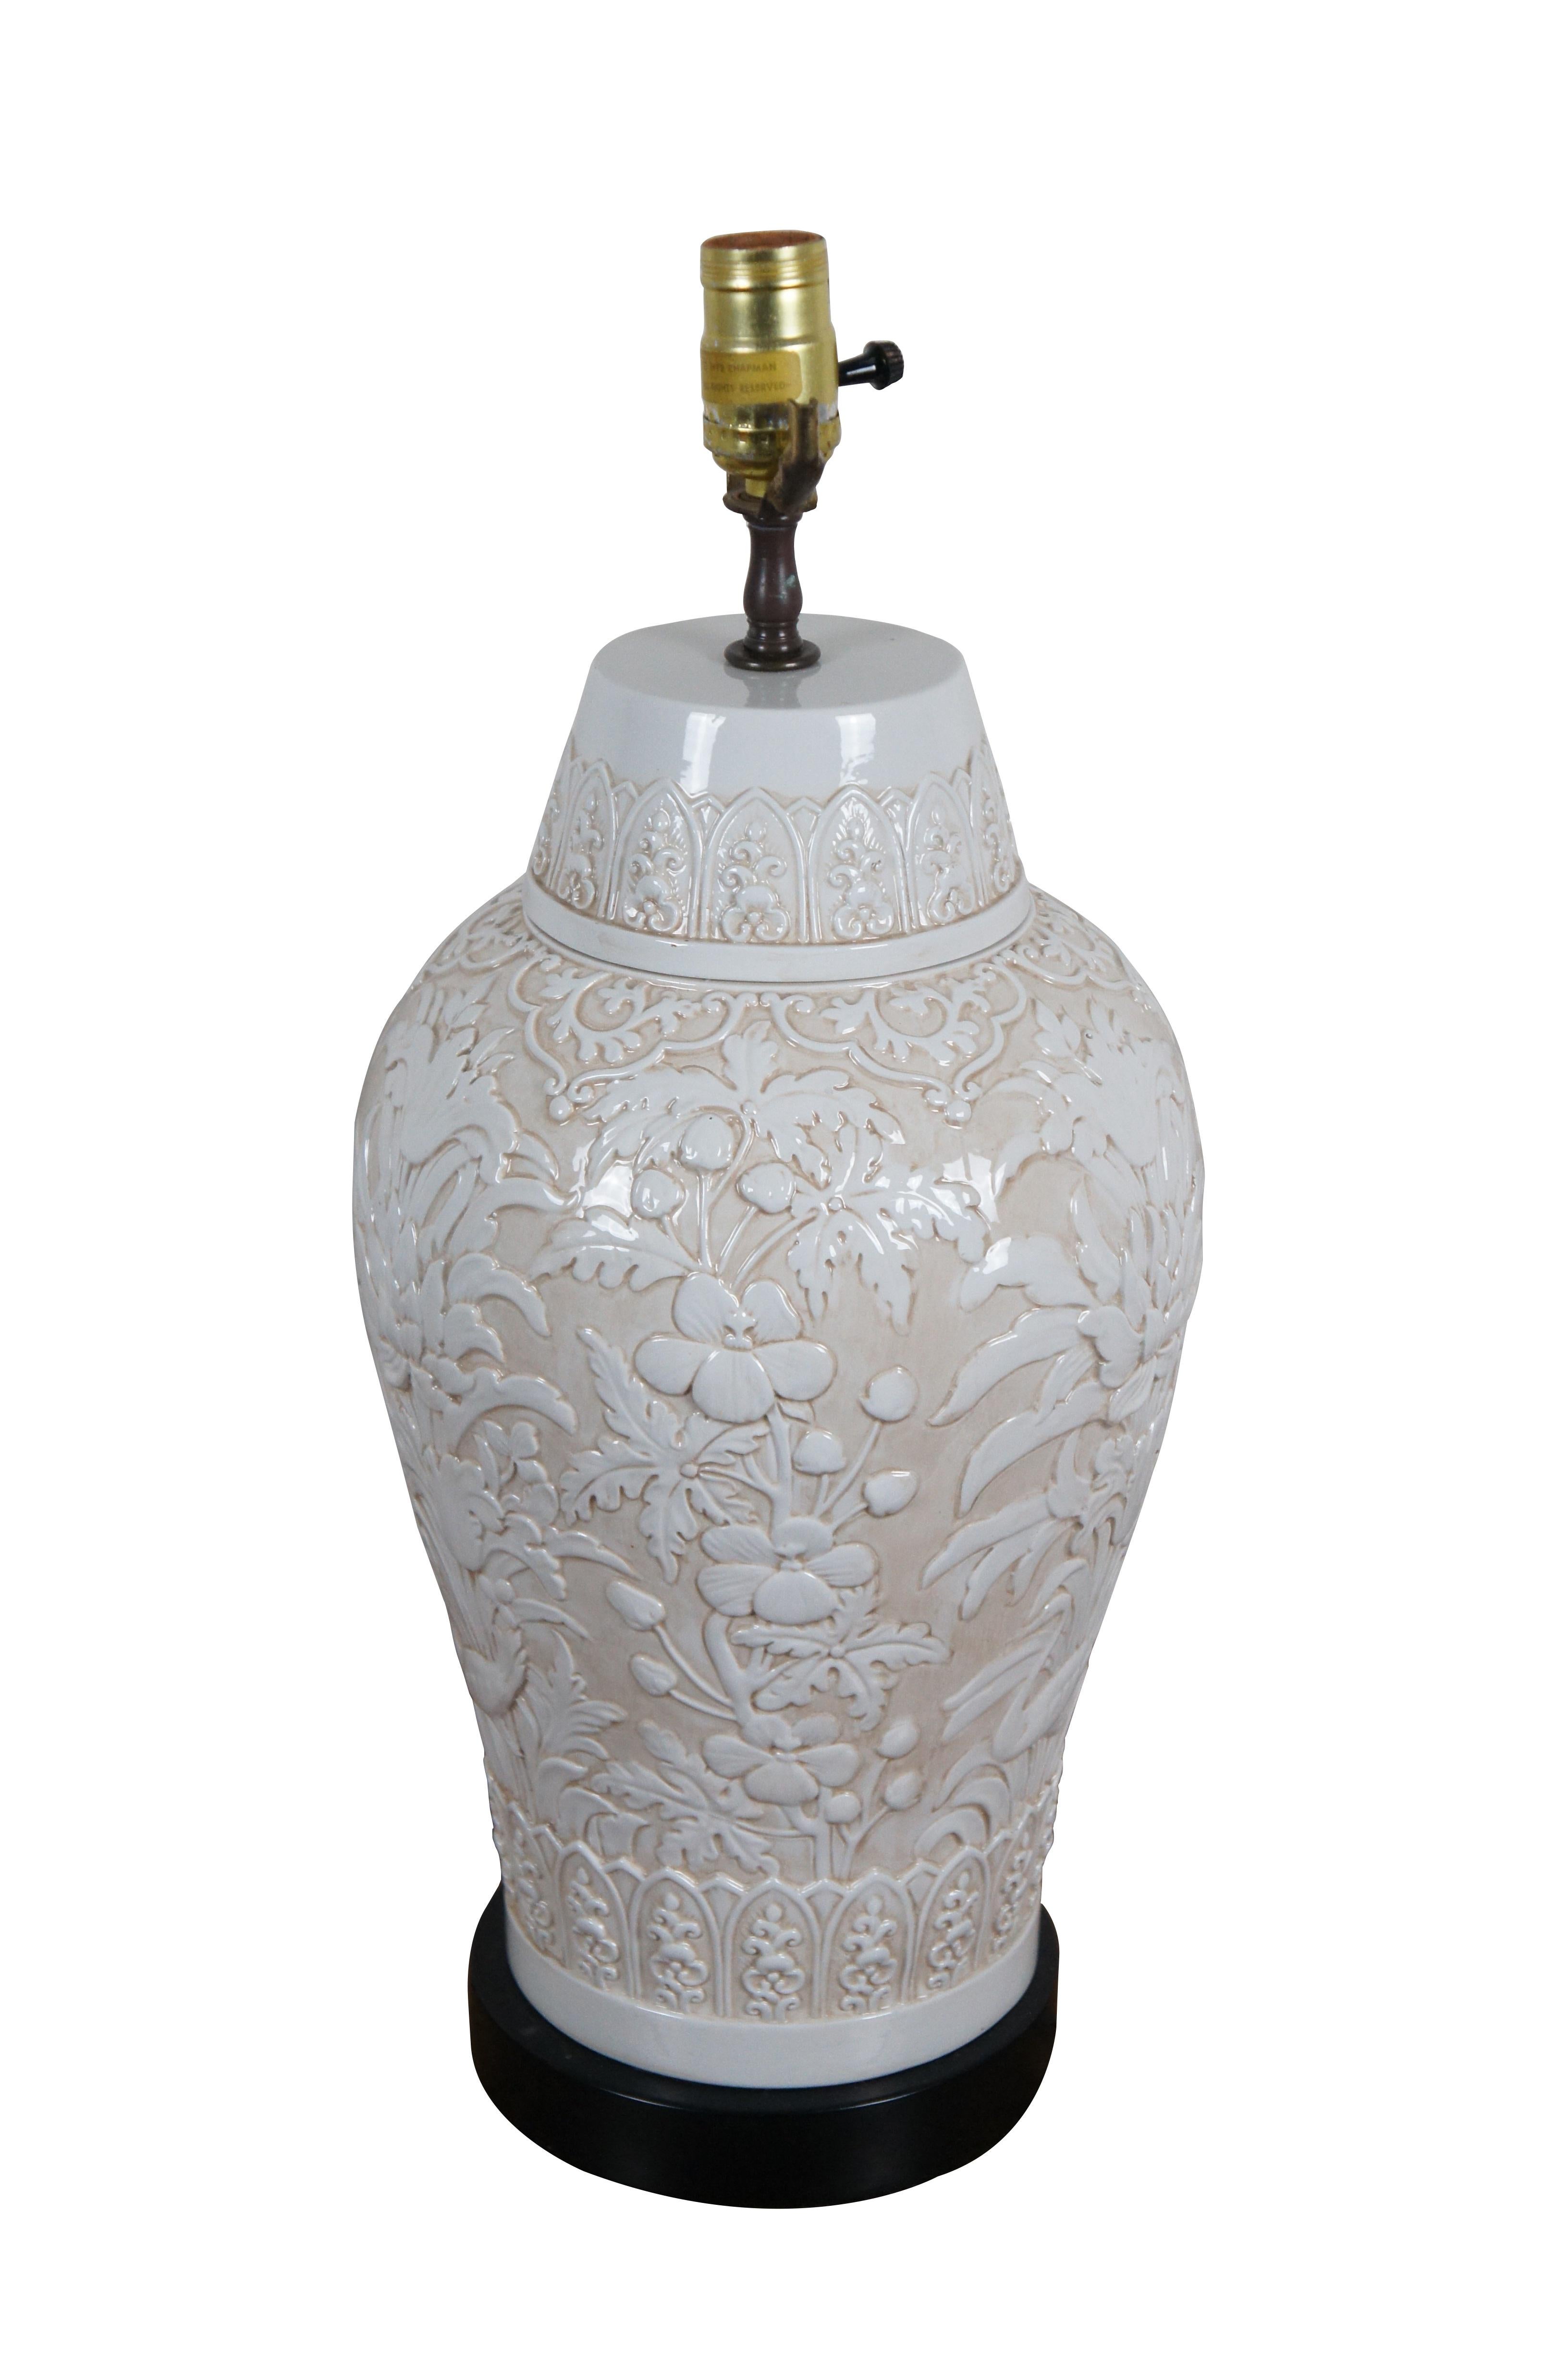 Vintage 1972 Chapman table lamp, crafted from porcelain featuring a chinoiserie design of flowers / chrysanthemum and birds in white relief on a beige ground, mounted on a simple black base. No harp or shade.

Dimensions:
9.75